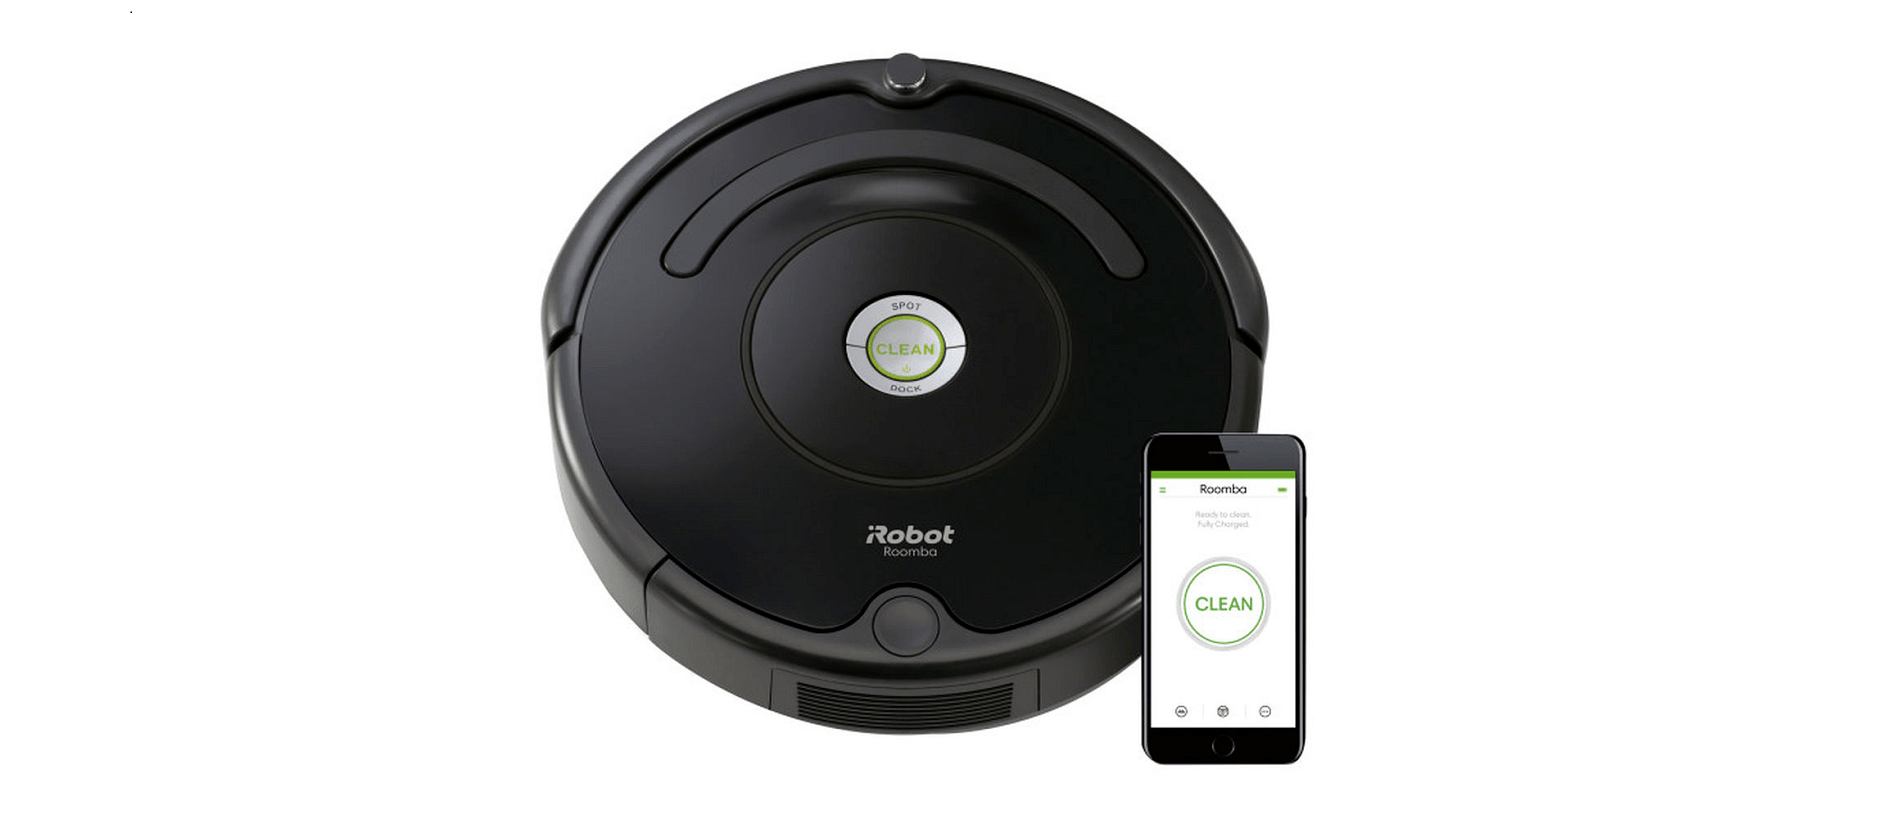 synd grænseflade til bundet Roomba 671 Review - A Basic Vacuum at a Reasonable Price